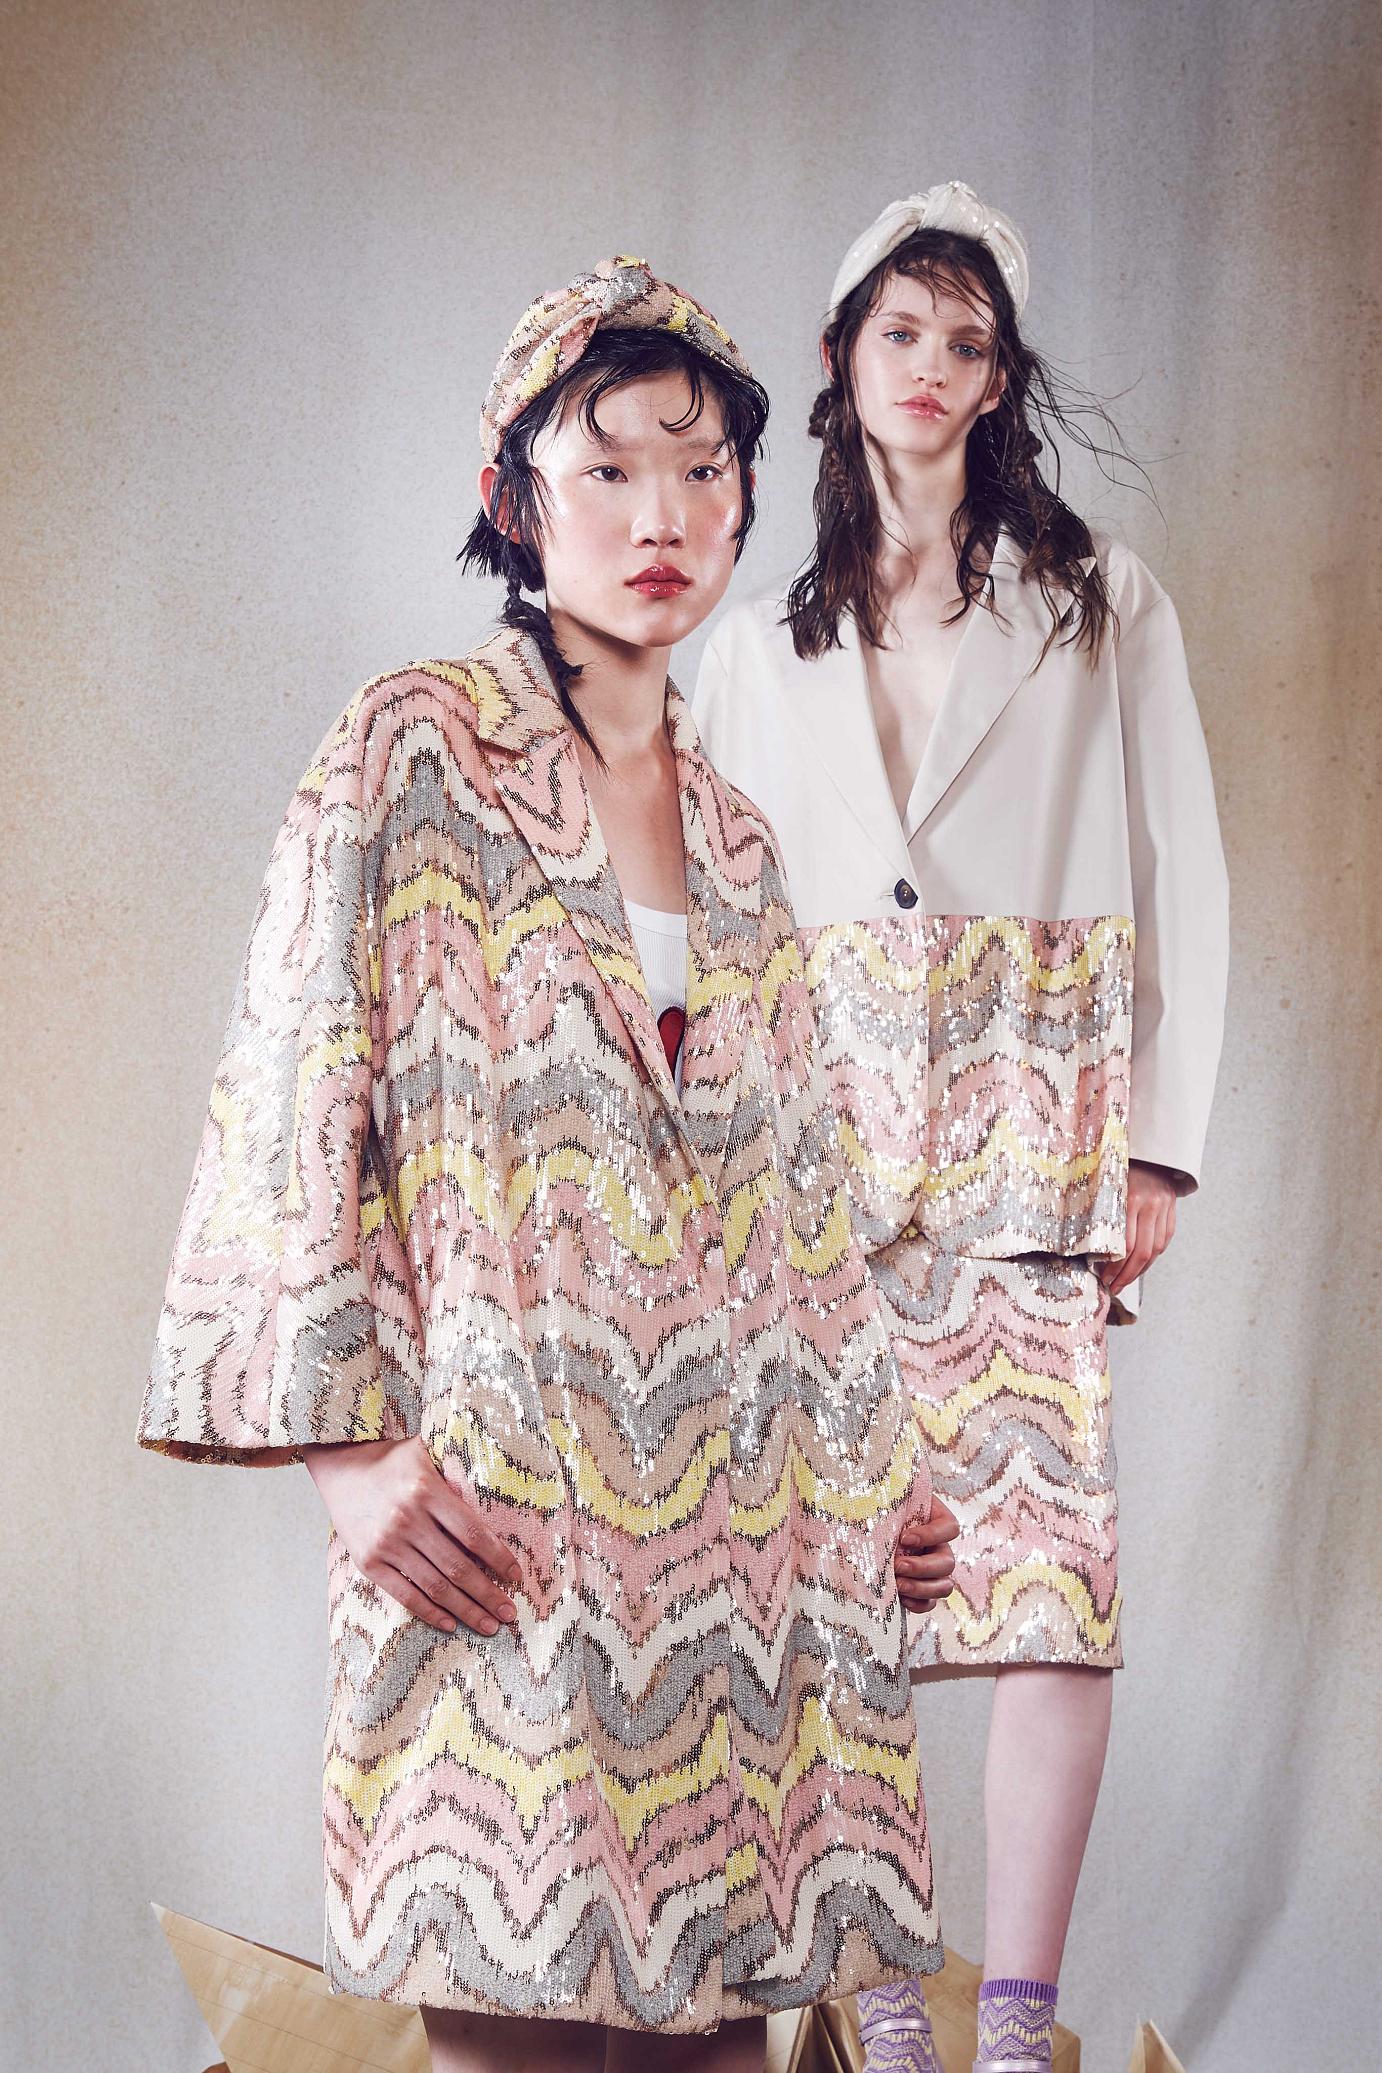 CoqCreative power by ProductionLink s.r.l. Antonio Marras Resort 2024 Antonio-Marras-Resort-2024  Antonio Marras Resort 2024